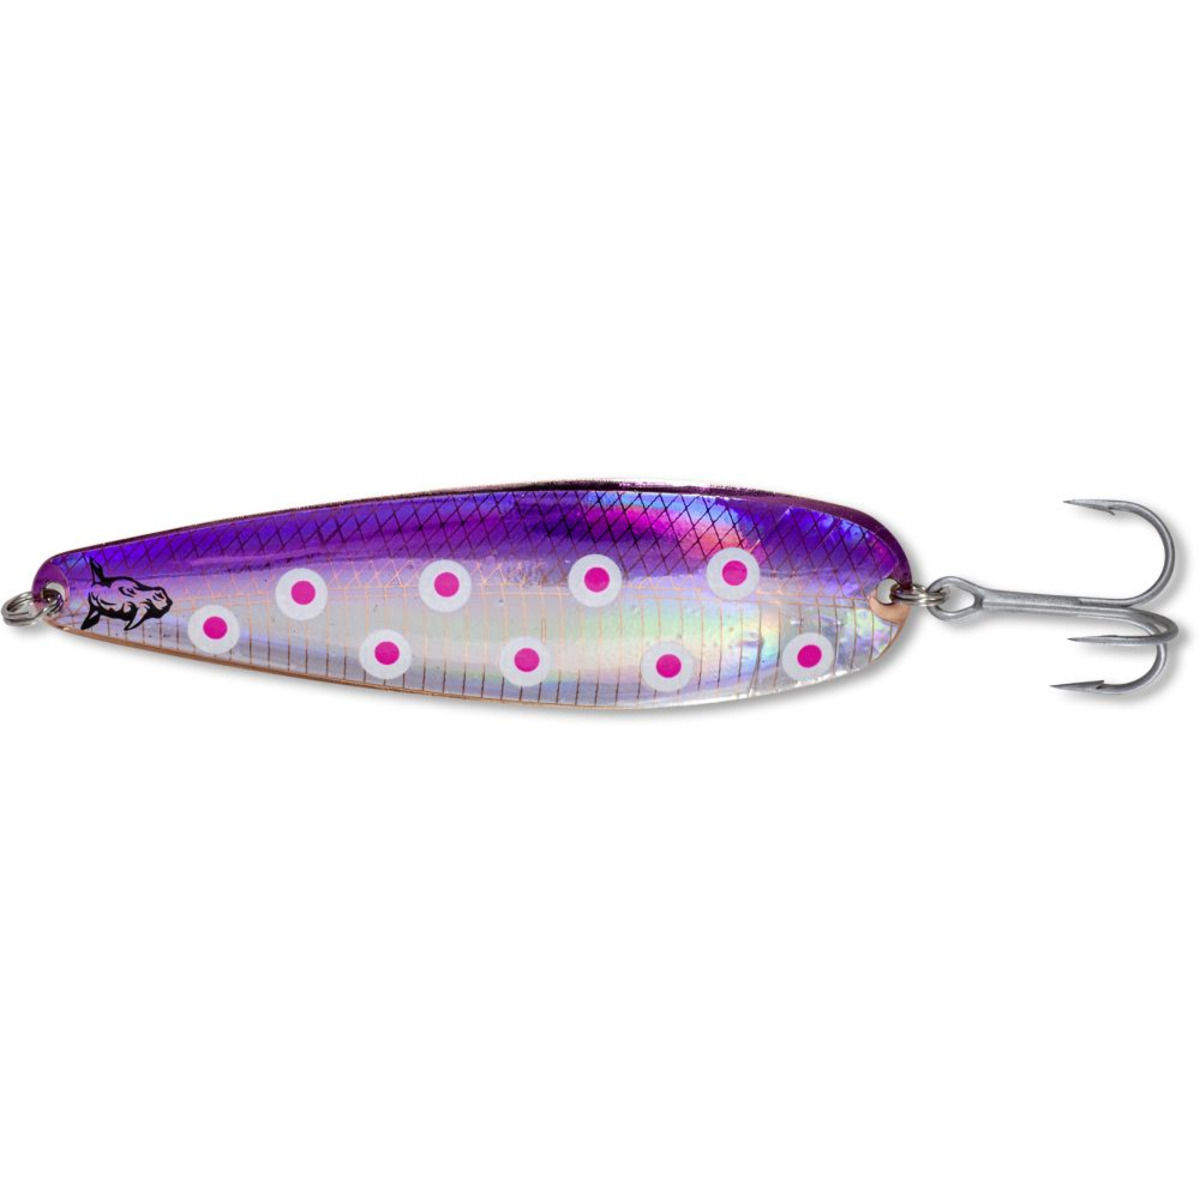 Rhino Trolling Spoons - 27 g - old witch